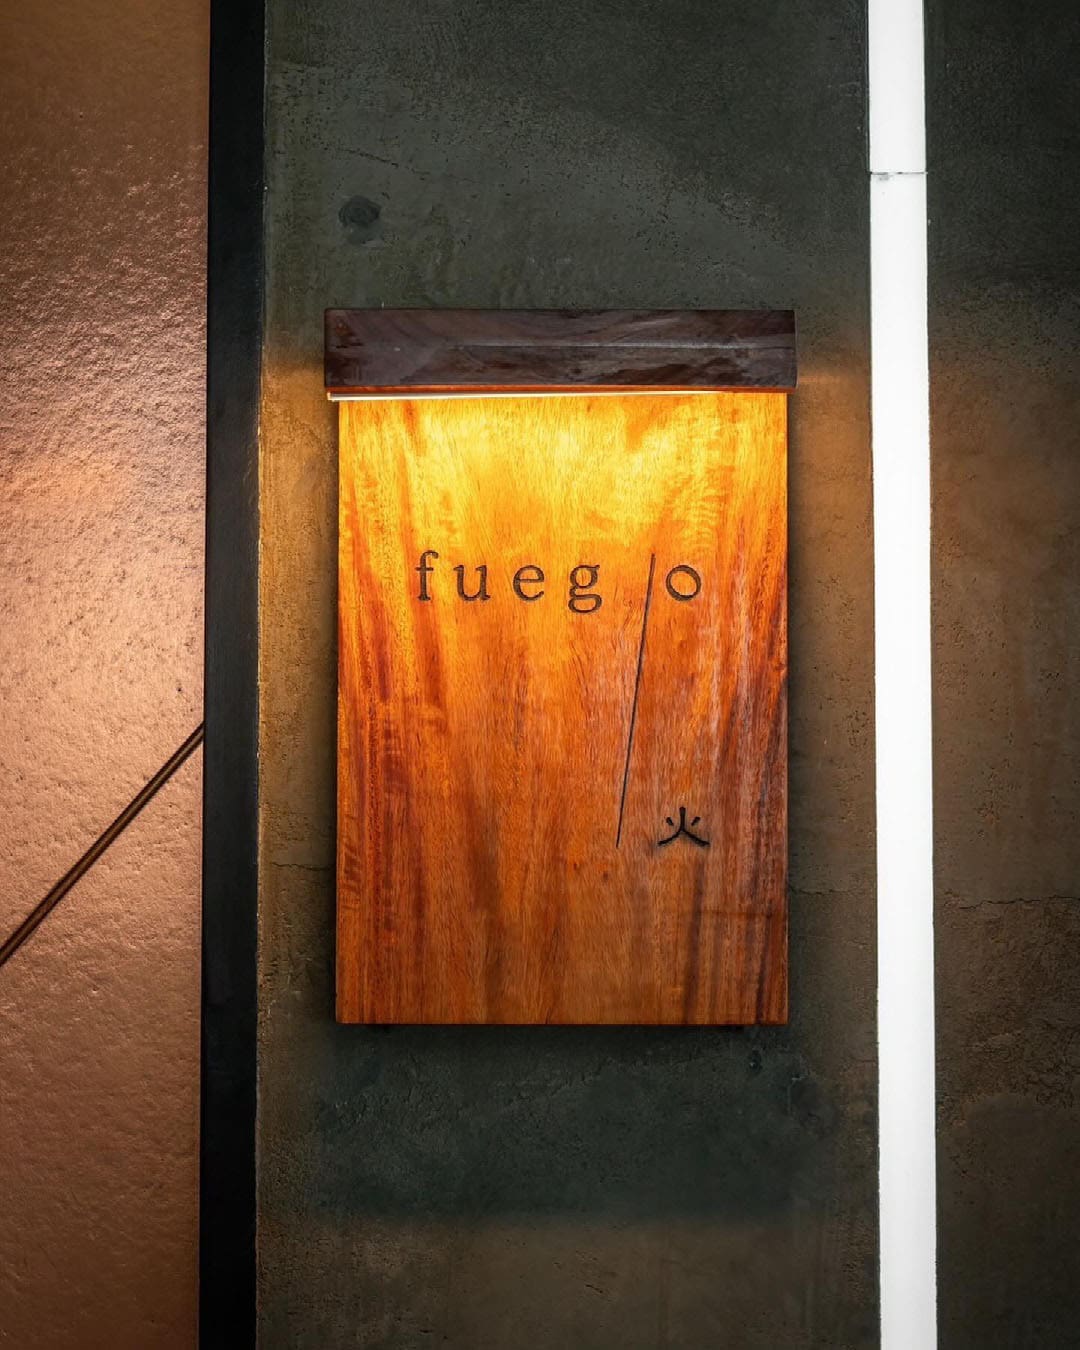 The best restaurants and bars in Bangkok's Thonglor | A wooden sign for the restaurant Fuego in Bangkok.